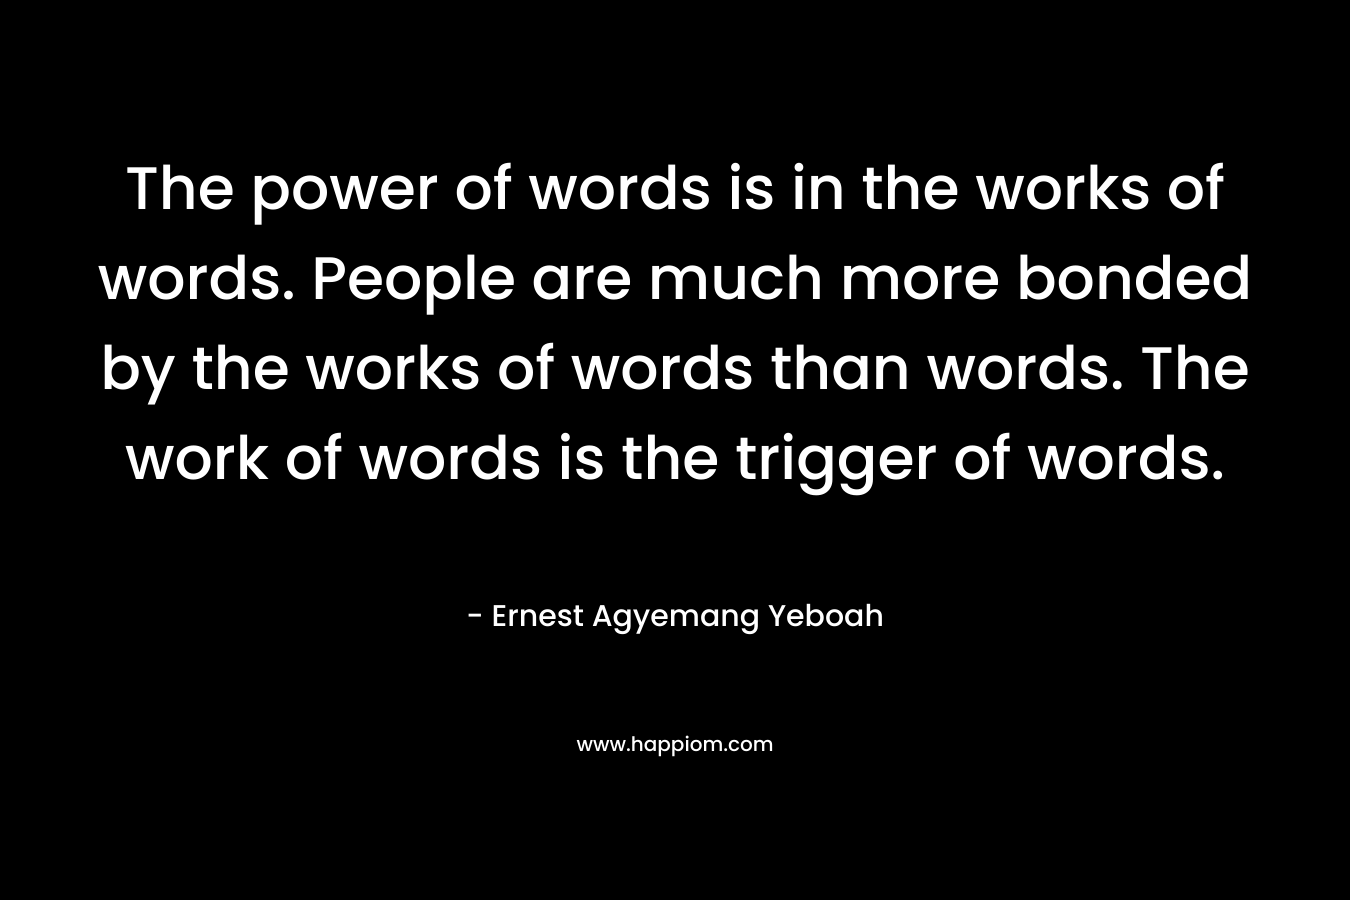 The power of words is in the works of words. People are much more bonded by the works of words than words. The work of words is the trigger of words.